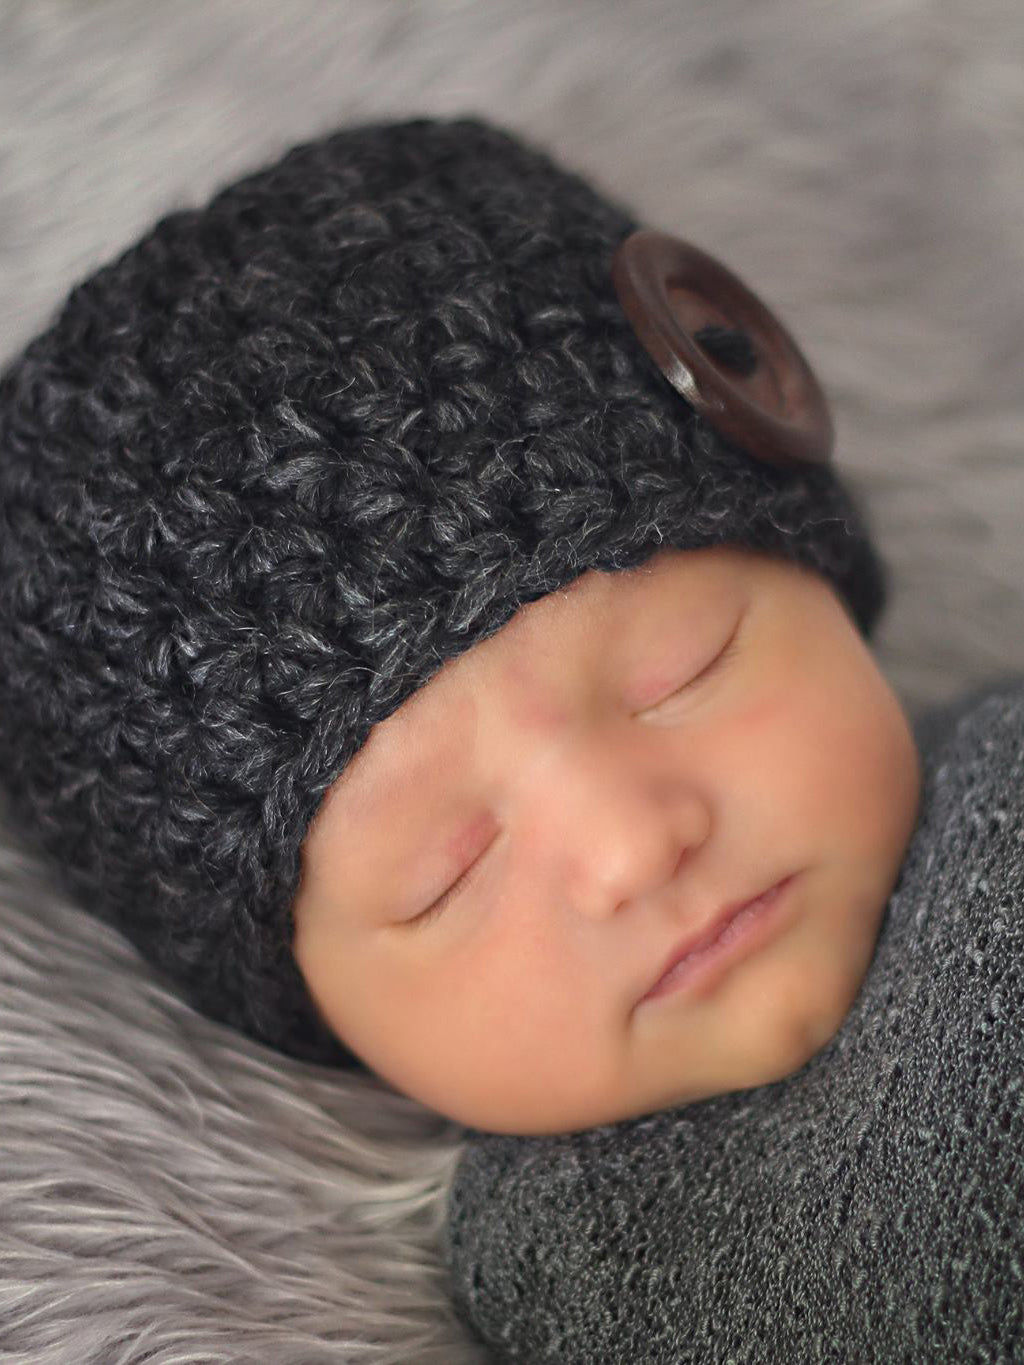 Charcoal gray button beanie baby hat by Two Seaside Babes